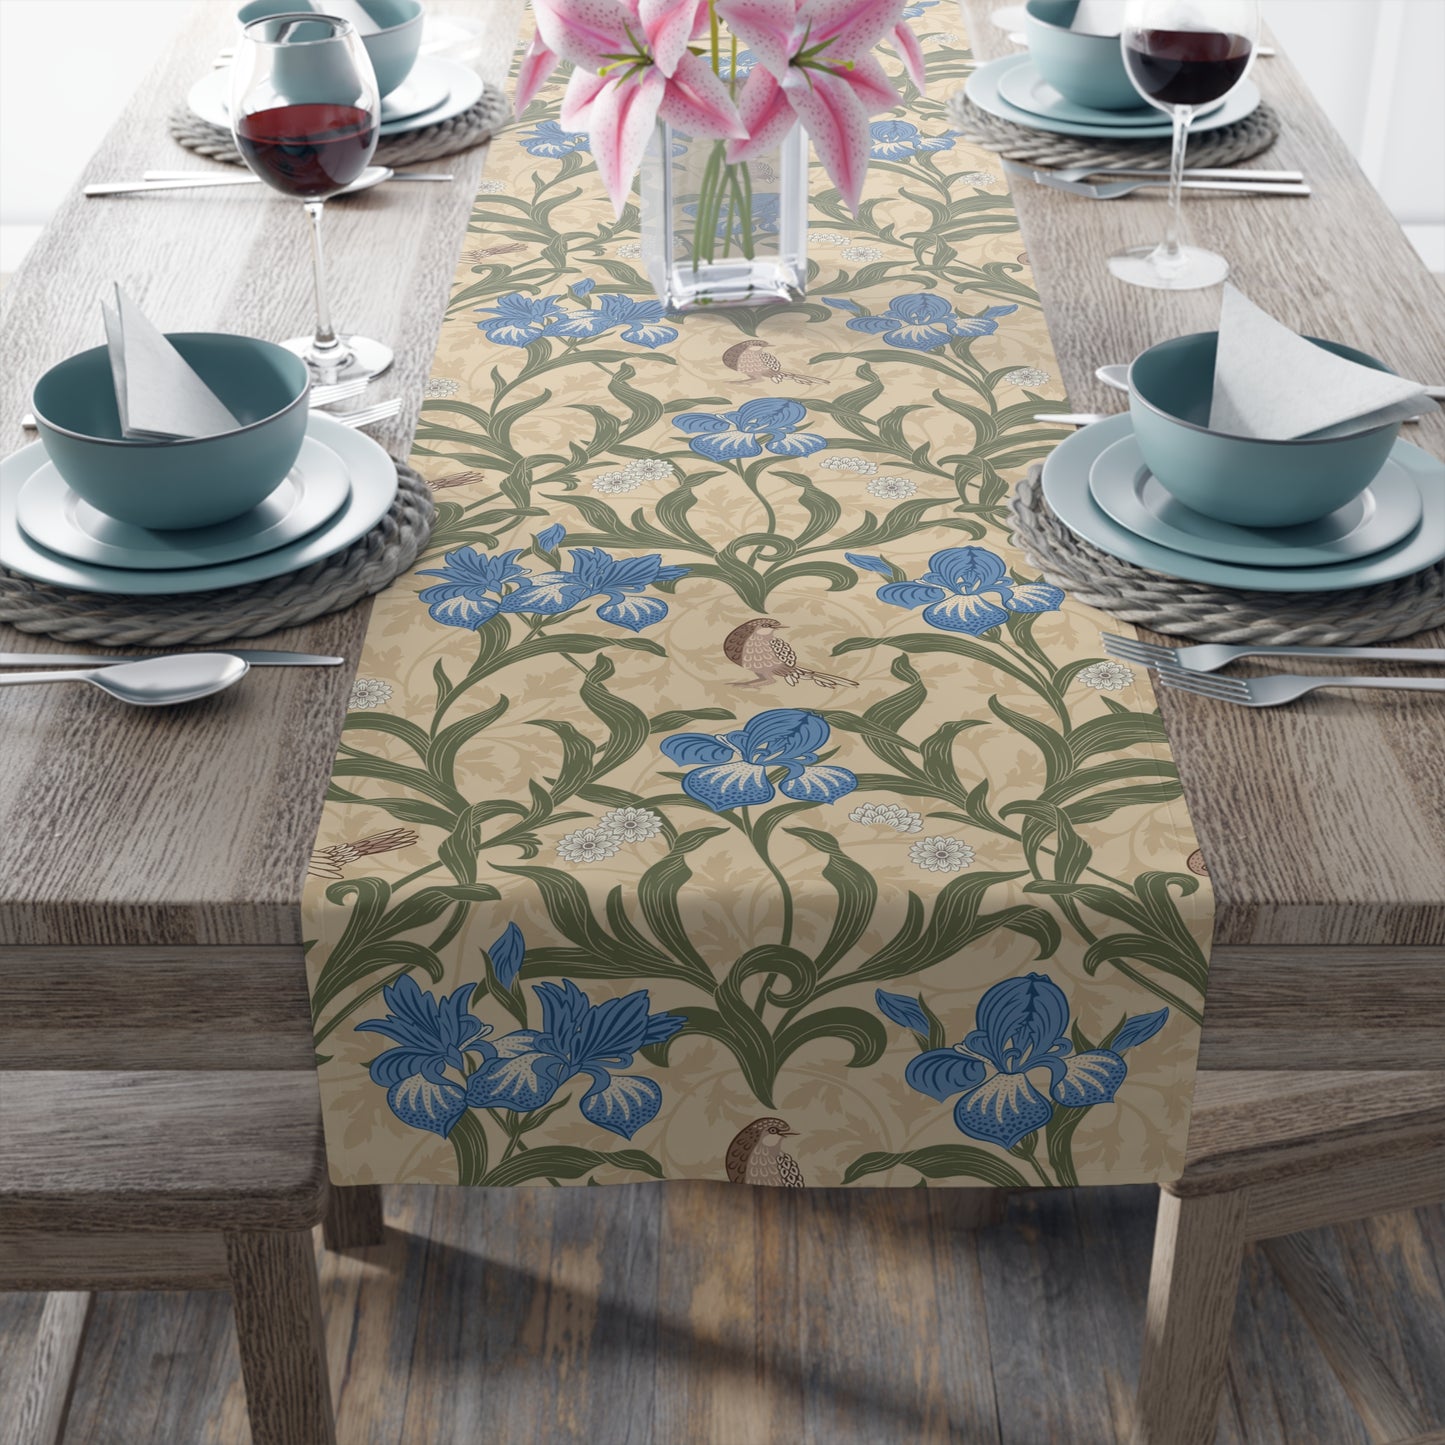 william-morris-co-table-runner-blue-iris-collection-4